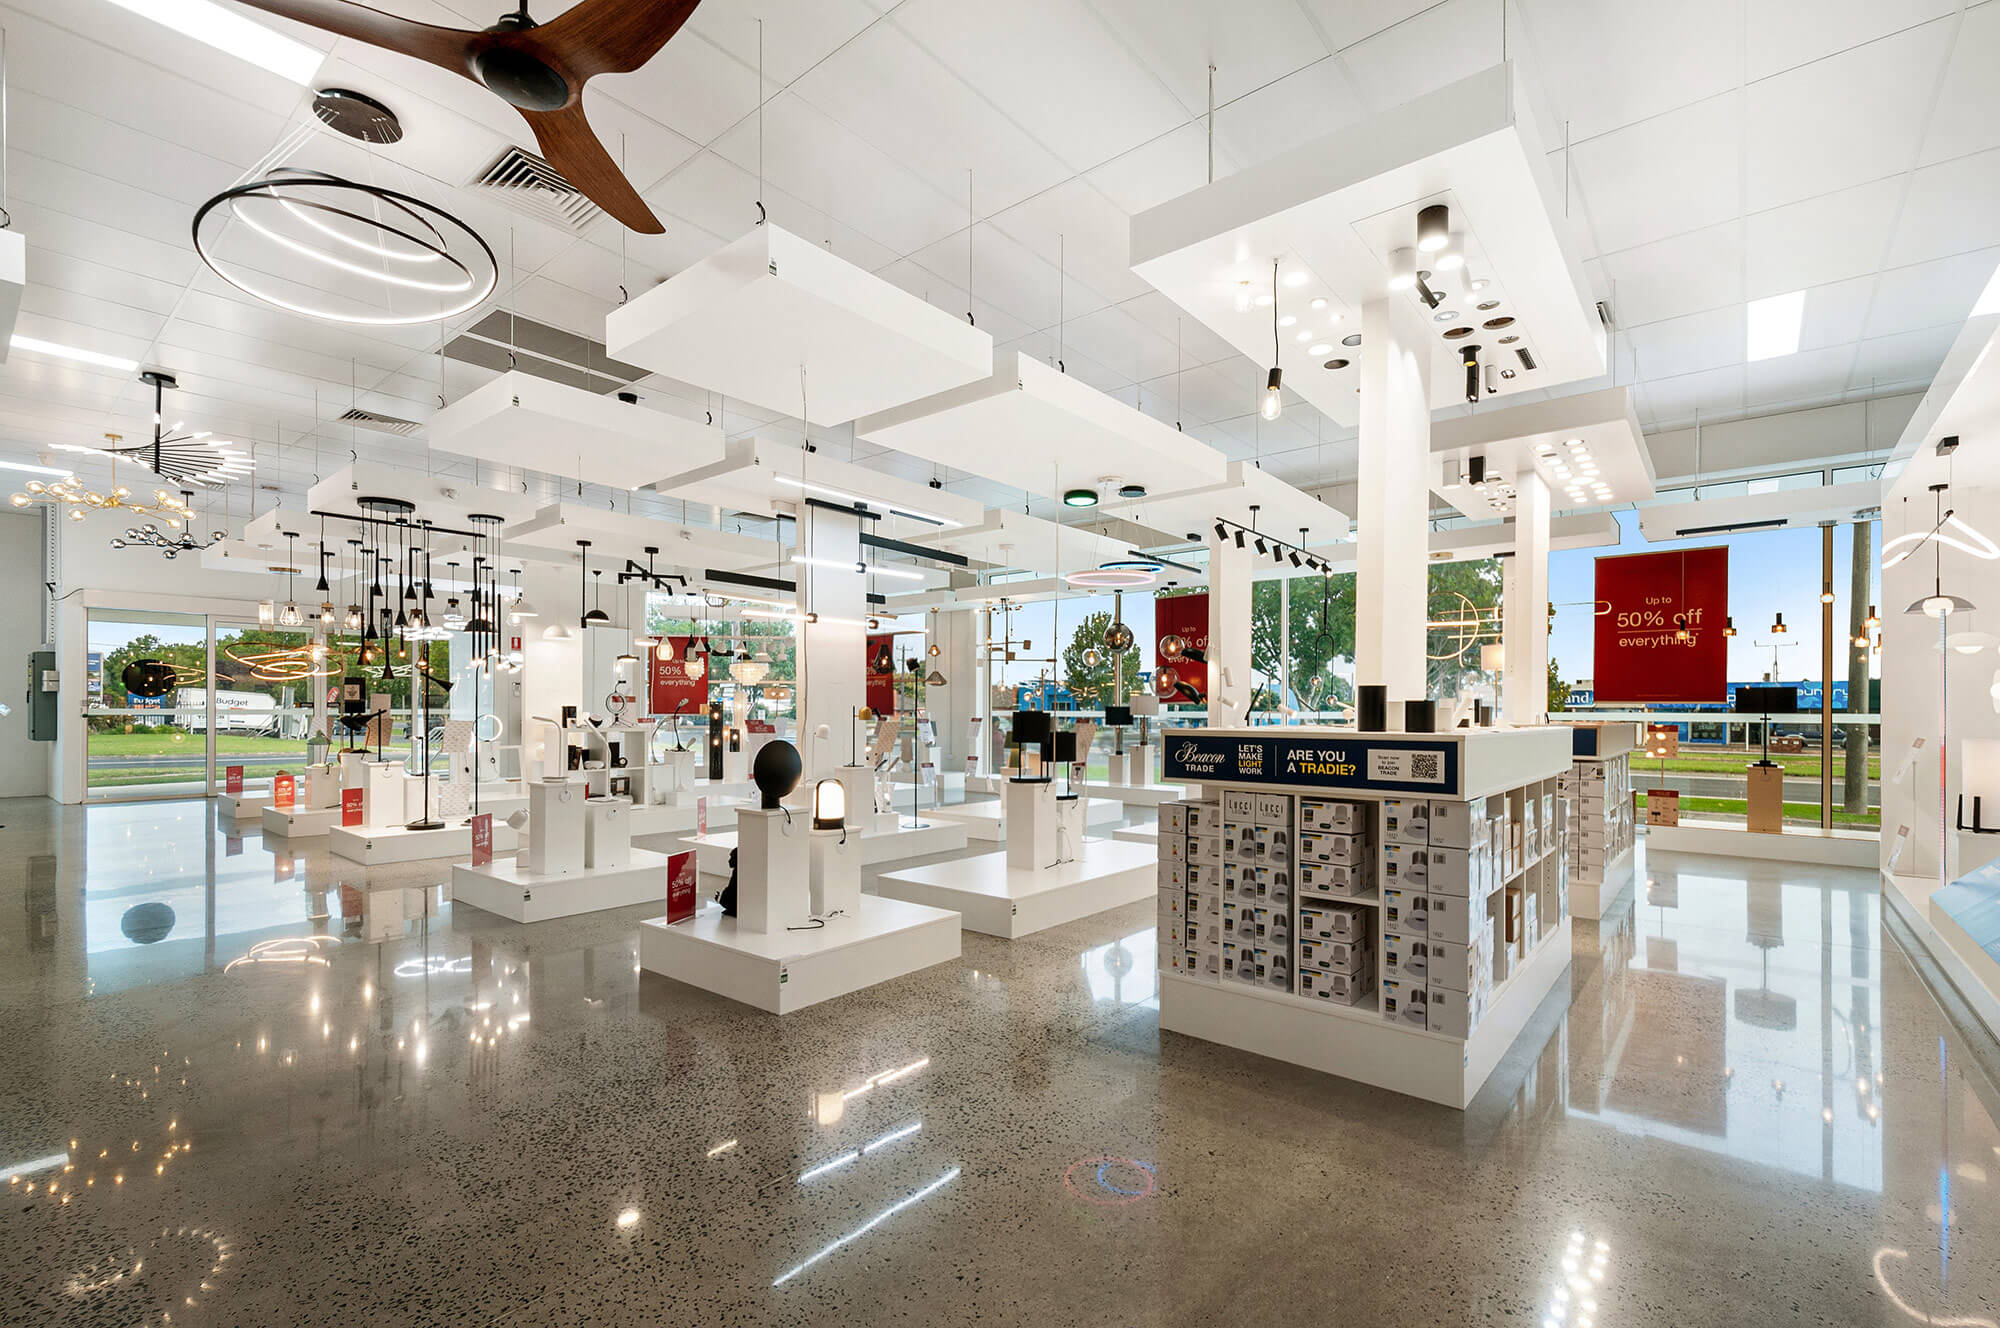 Photo of the interior of Beacon lighting store showing polished concrete floor, high white ceilings, and rows of various ceiling lights on display